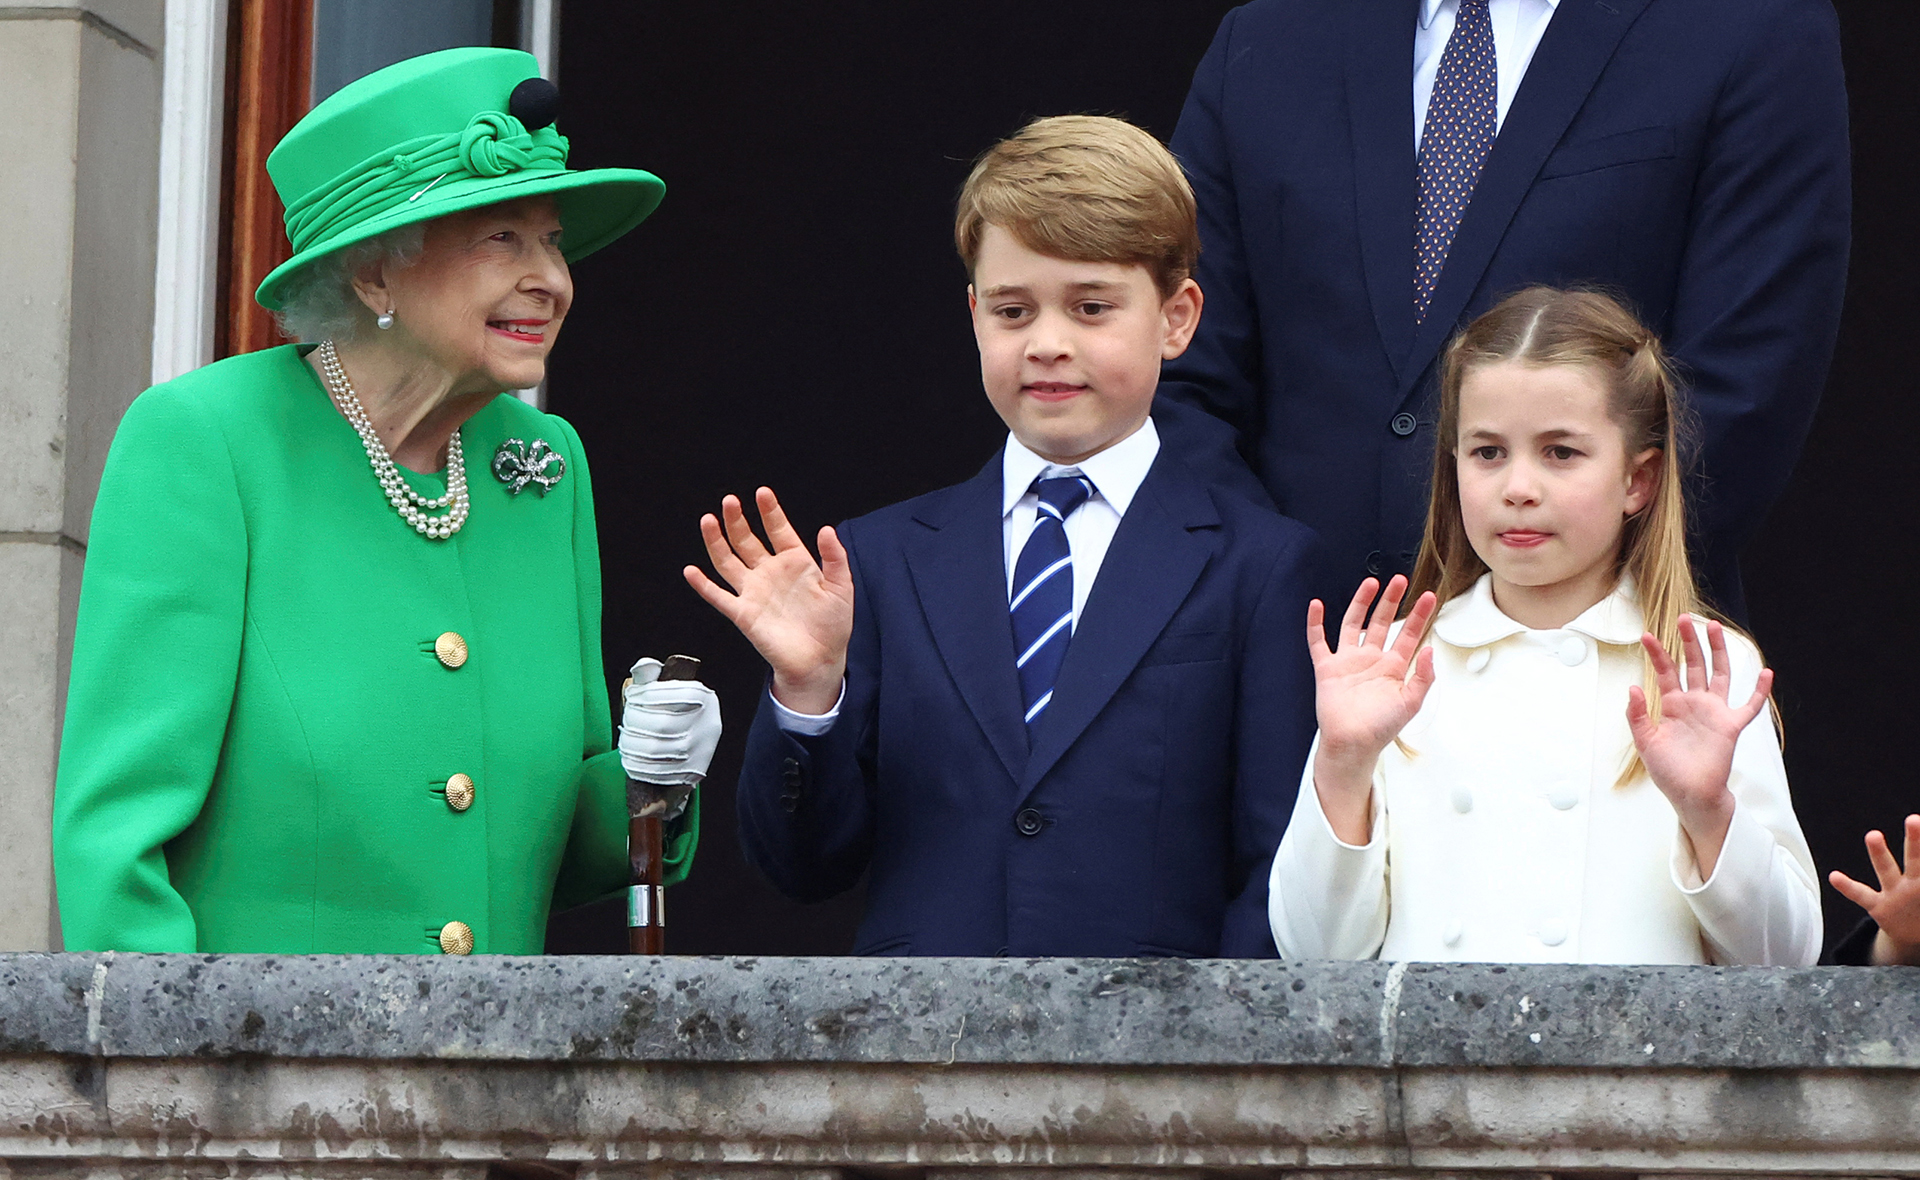 Prince George and Princess Charlotte’s involvement in the Queen’s funeral is revealed